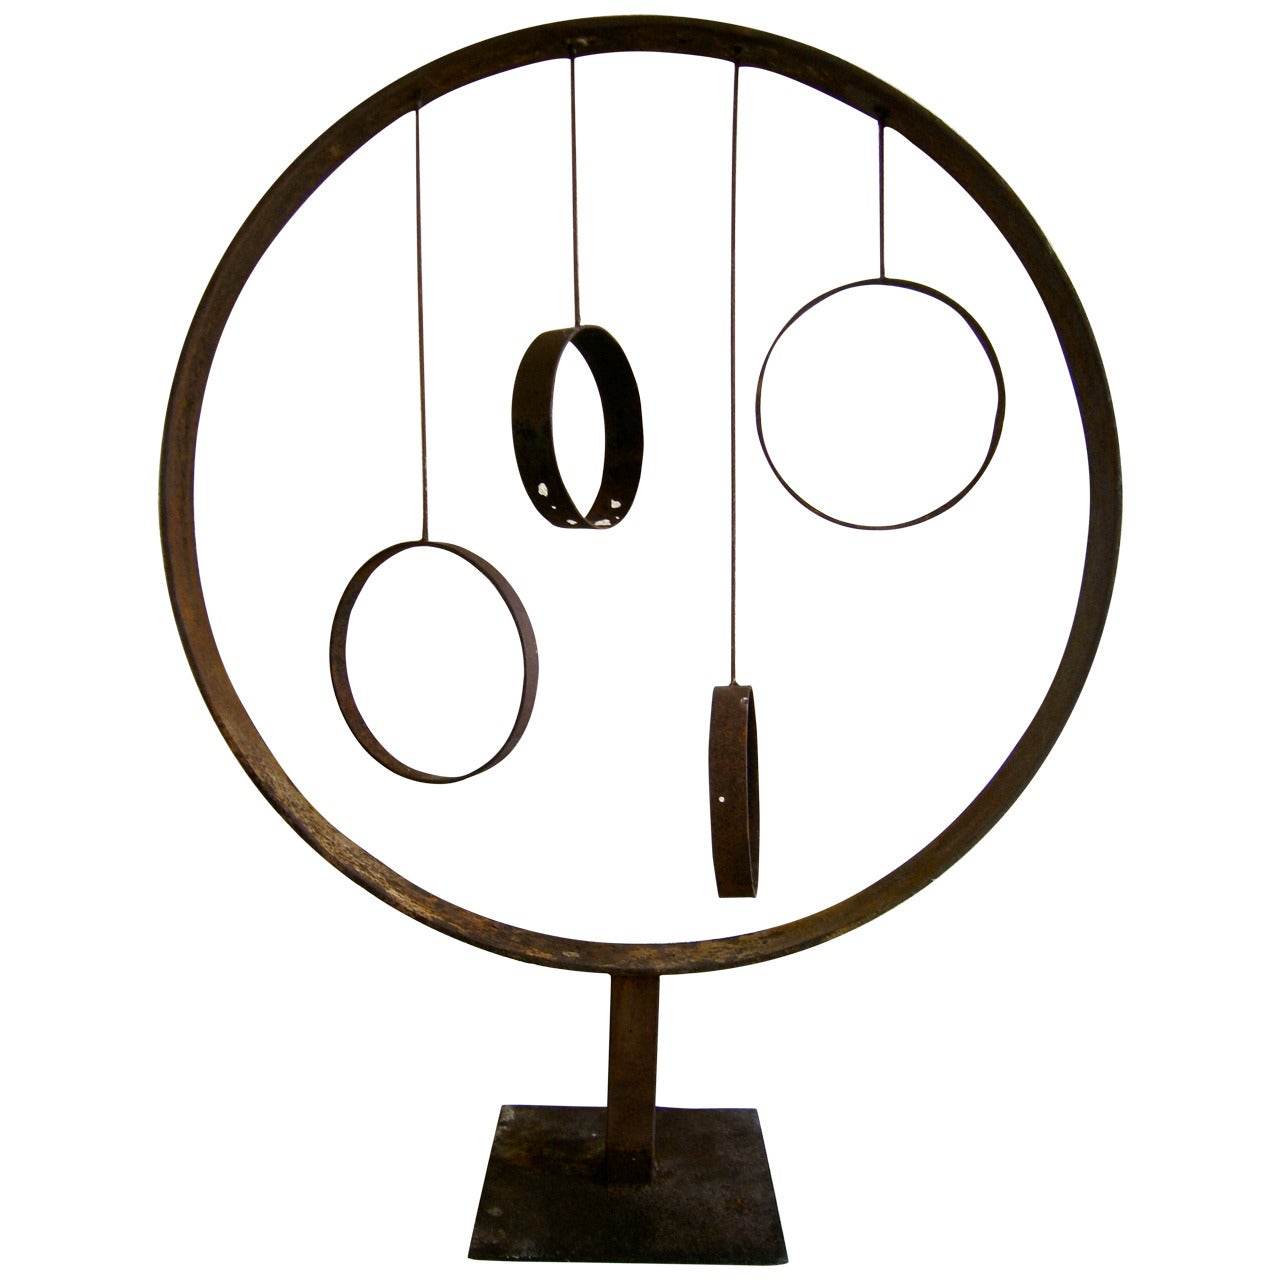 "Circulus Vitae" A Weathered Steel Sculpture in the Round C. 1960's